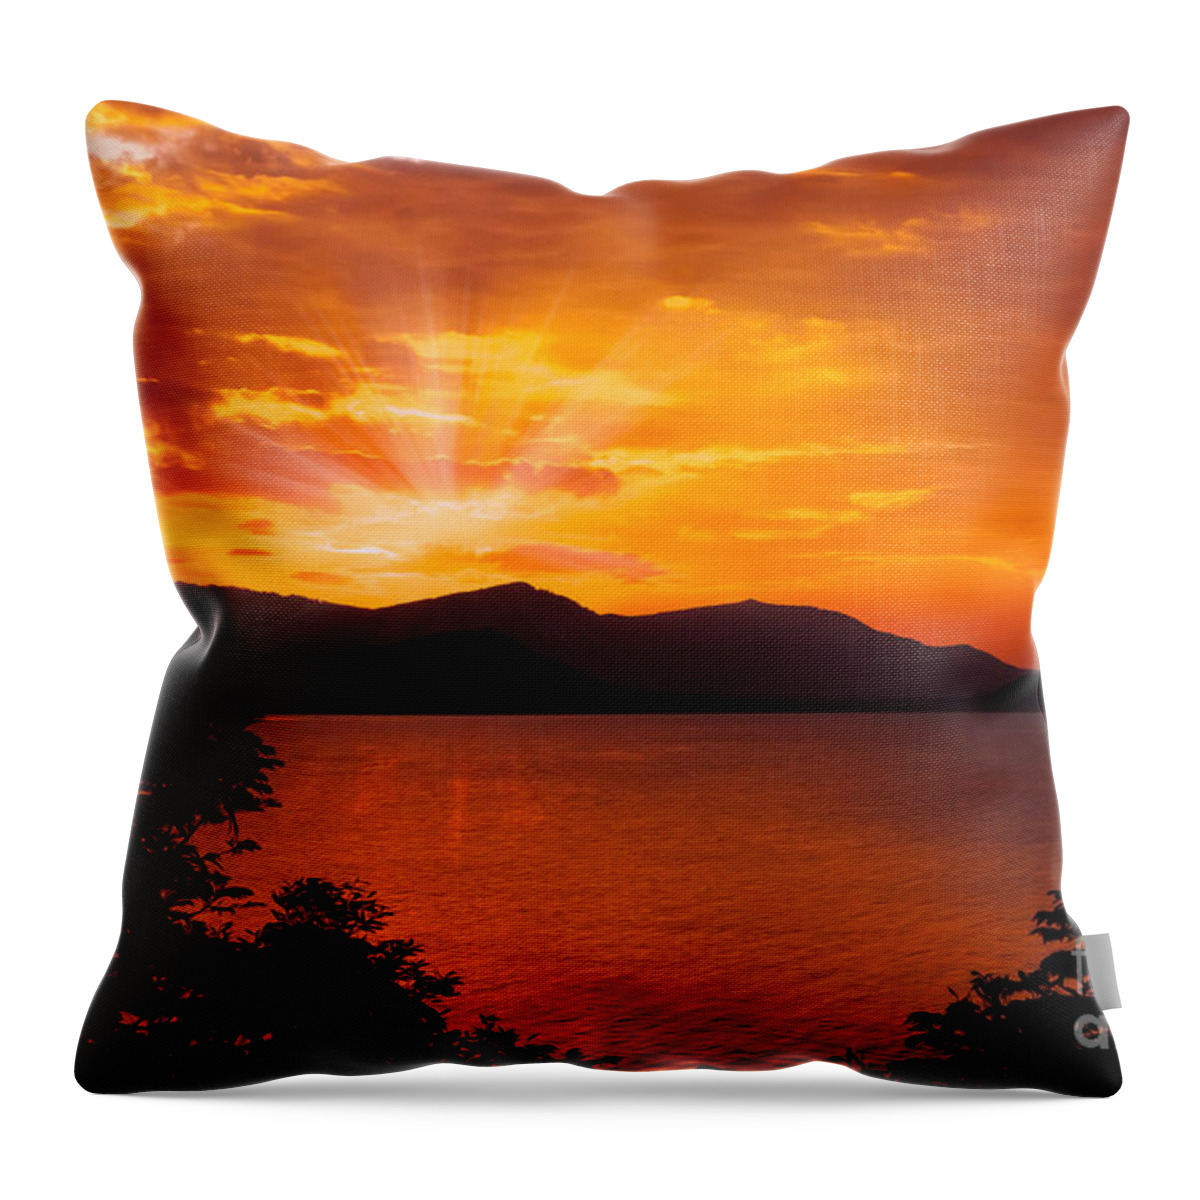 Hdr Throw Pillow featuring the photograph Som Island Sunset by Adrian Evans